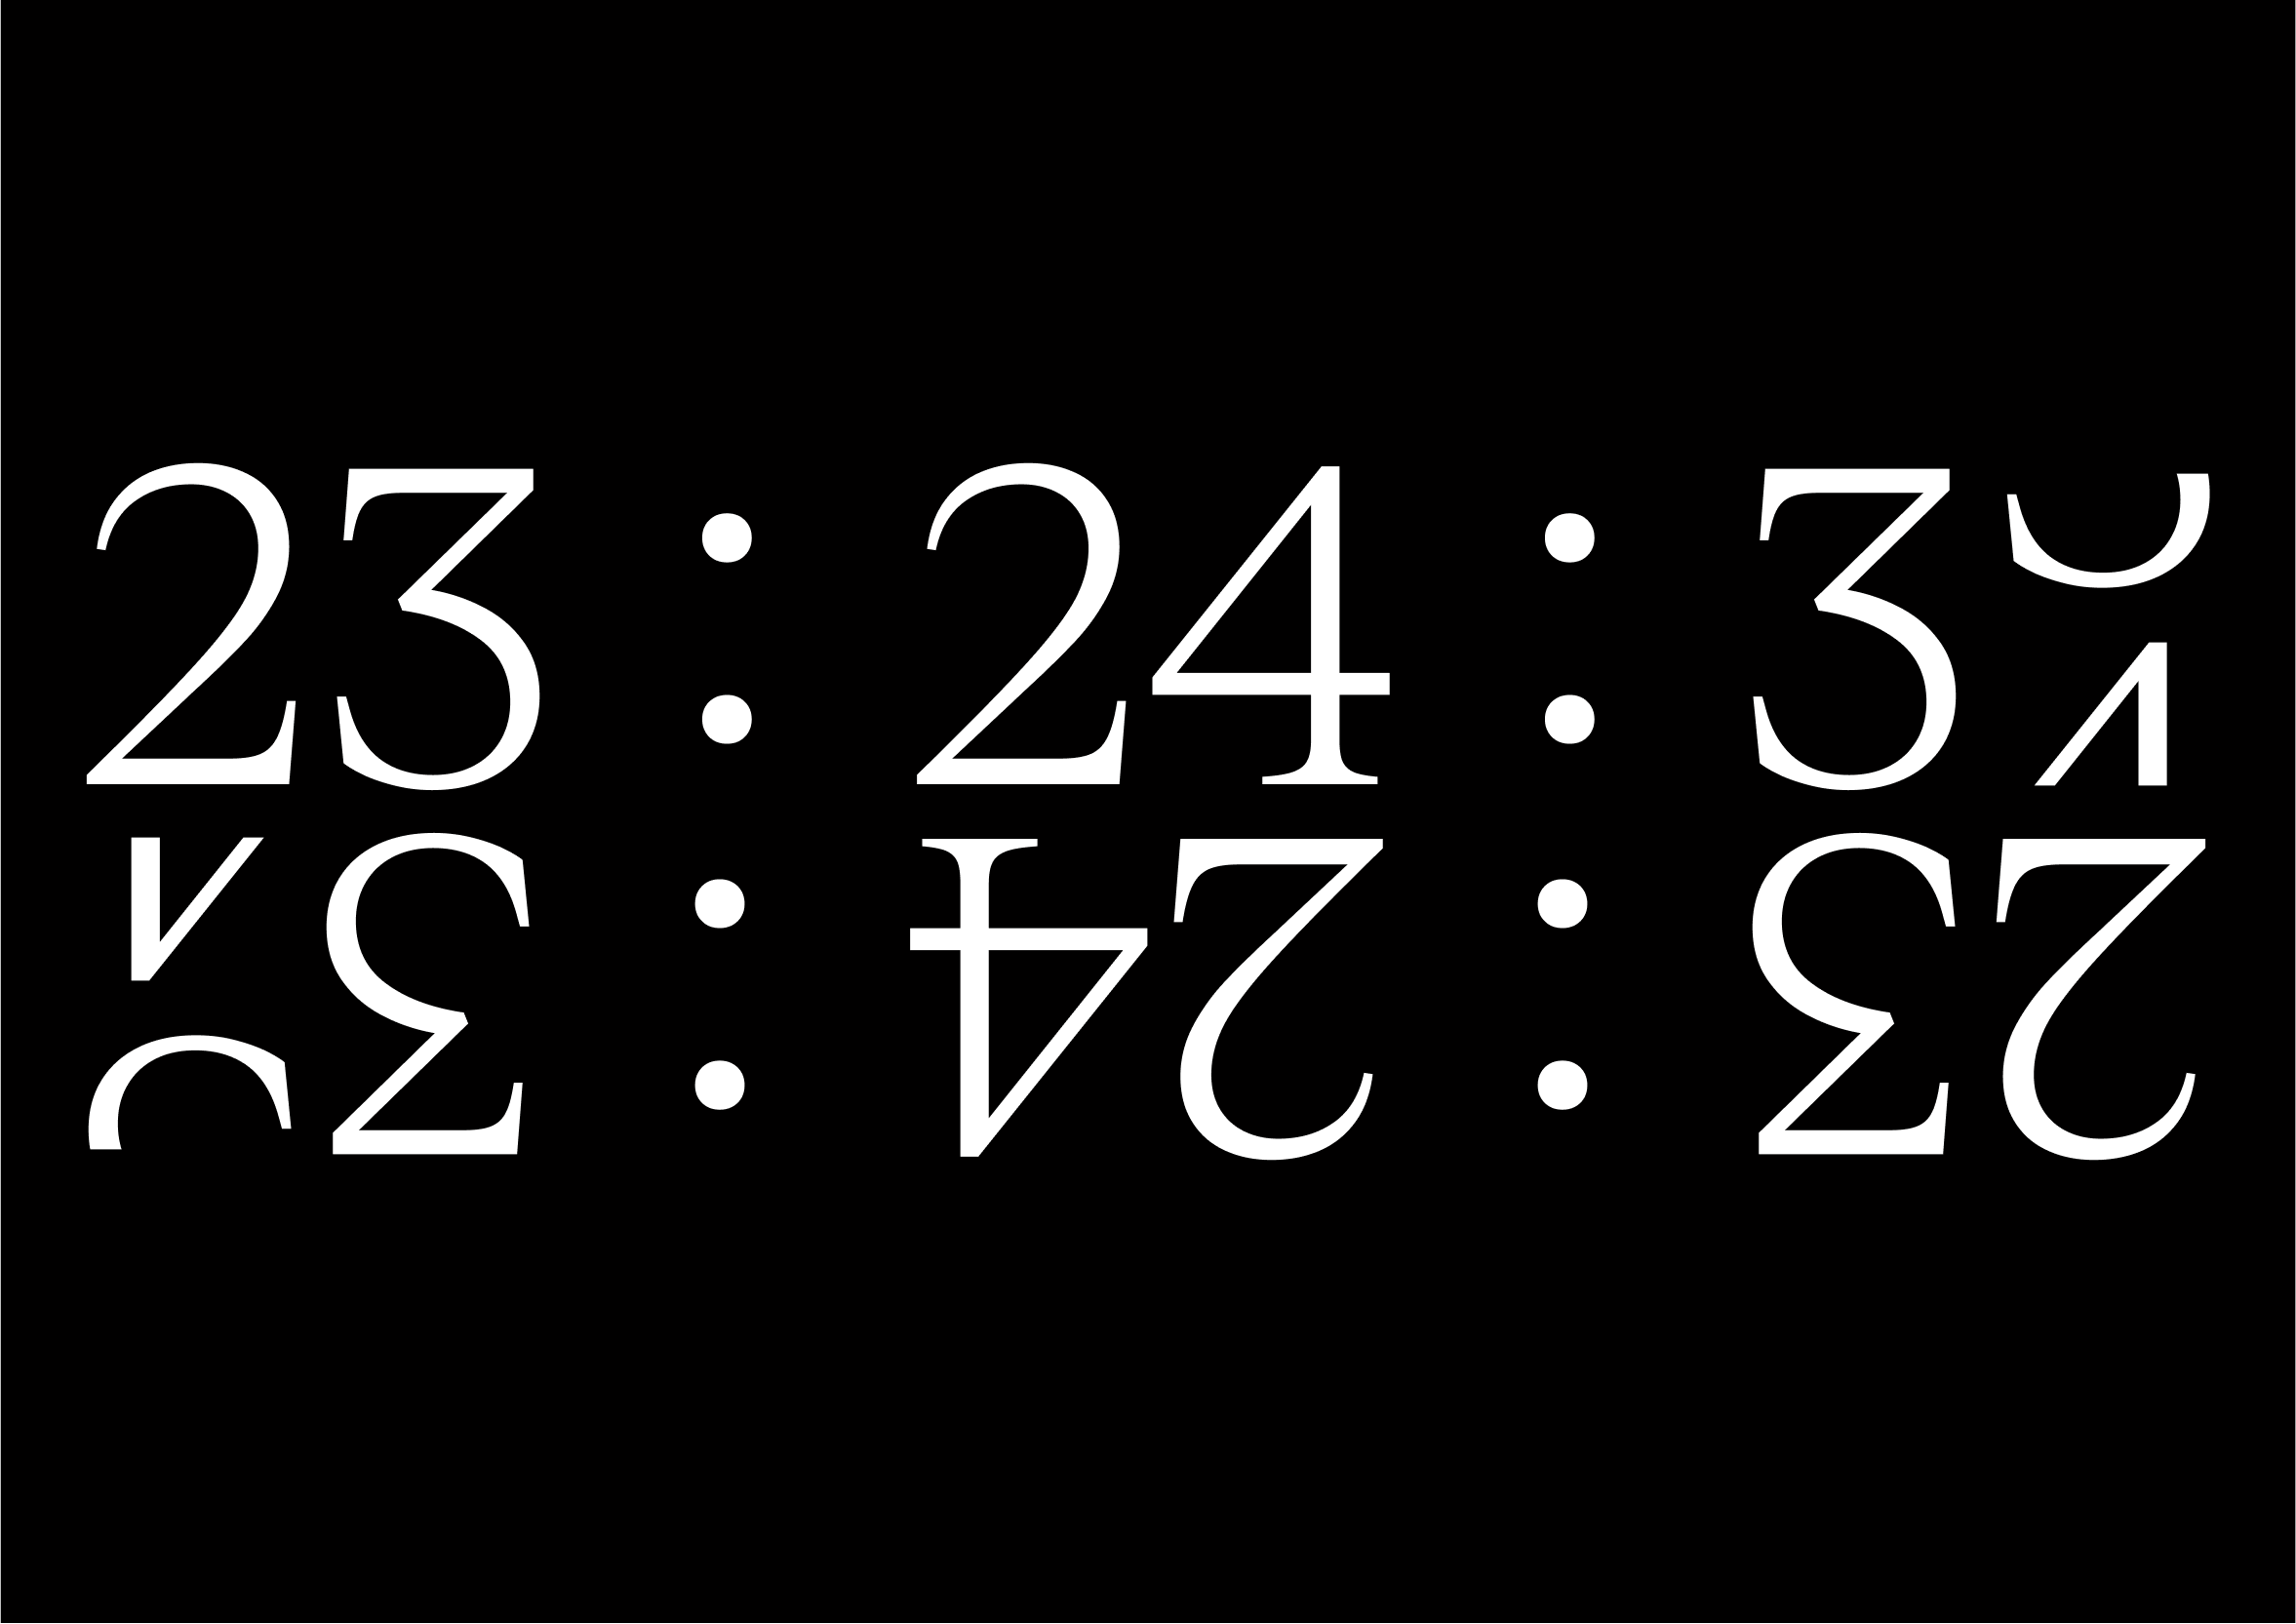 A black background with large white countdown text of 24 hours